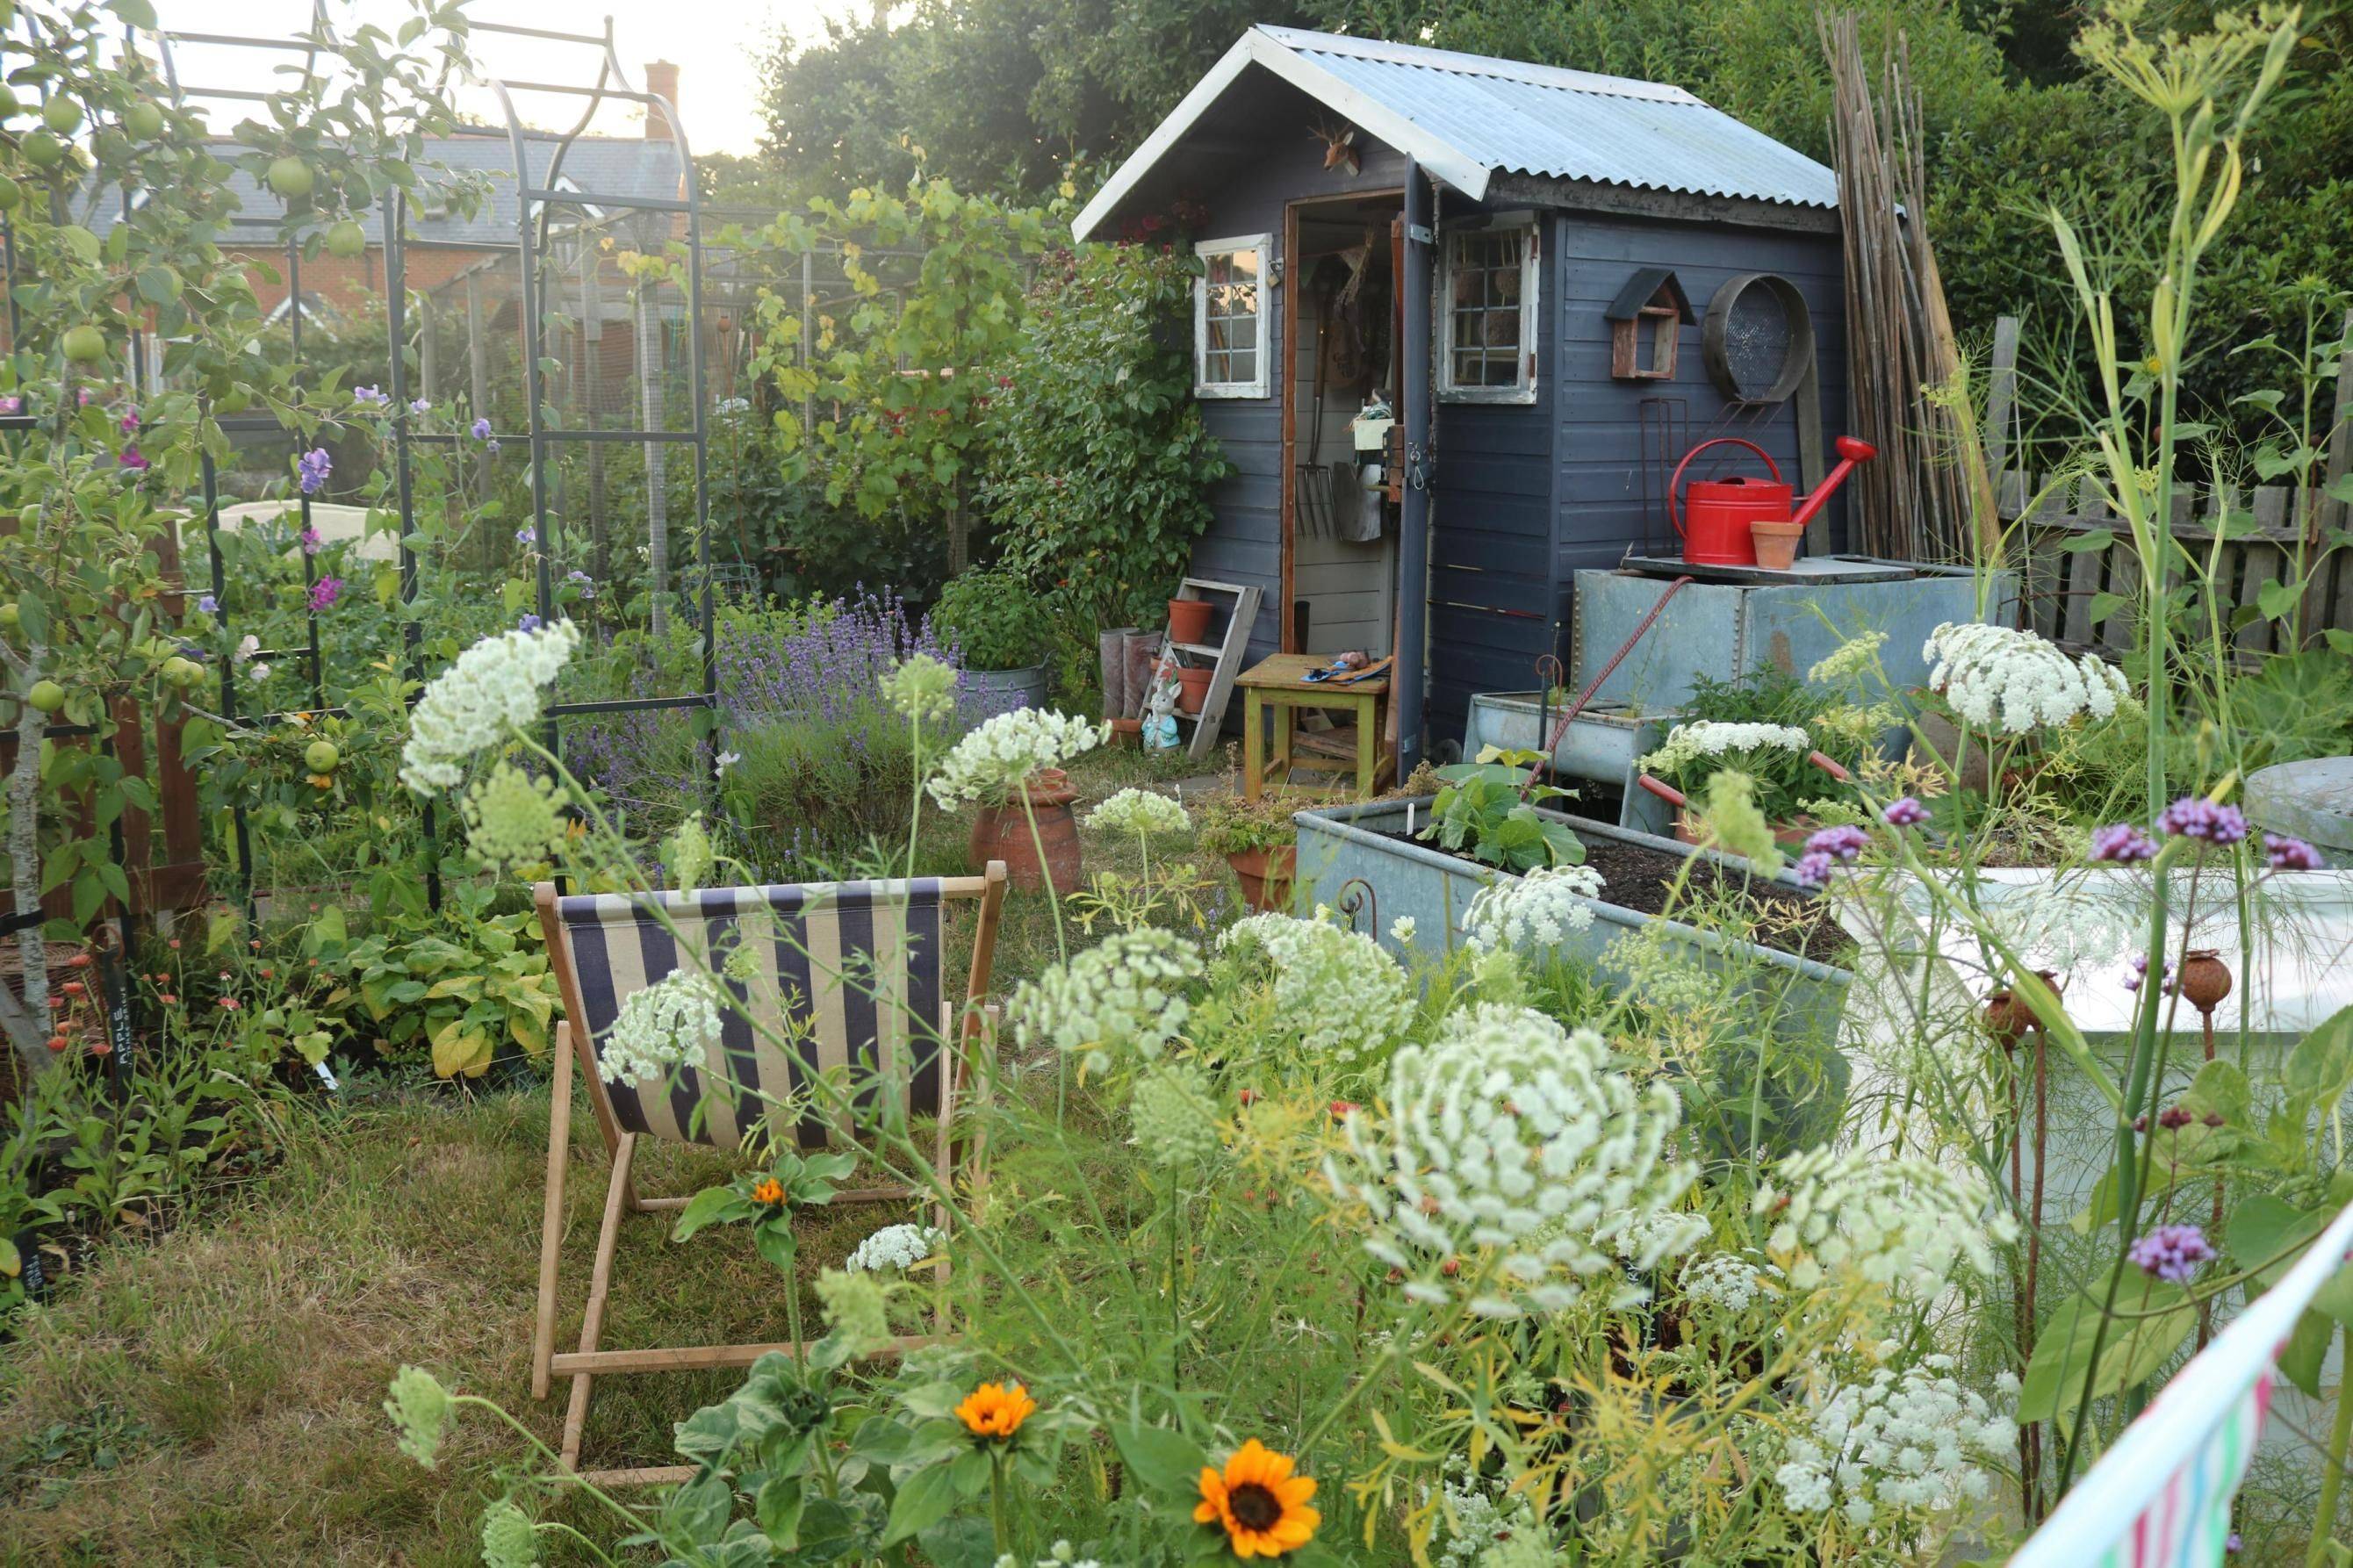 The Little Purple Potting Shed